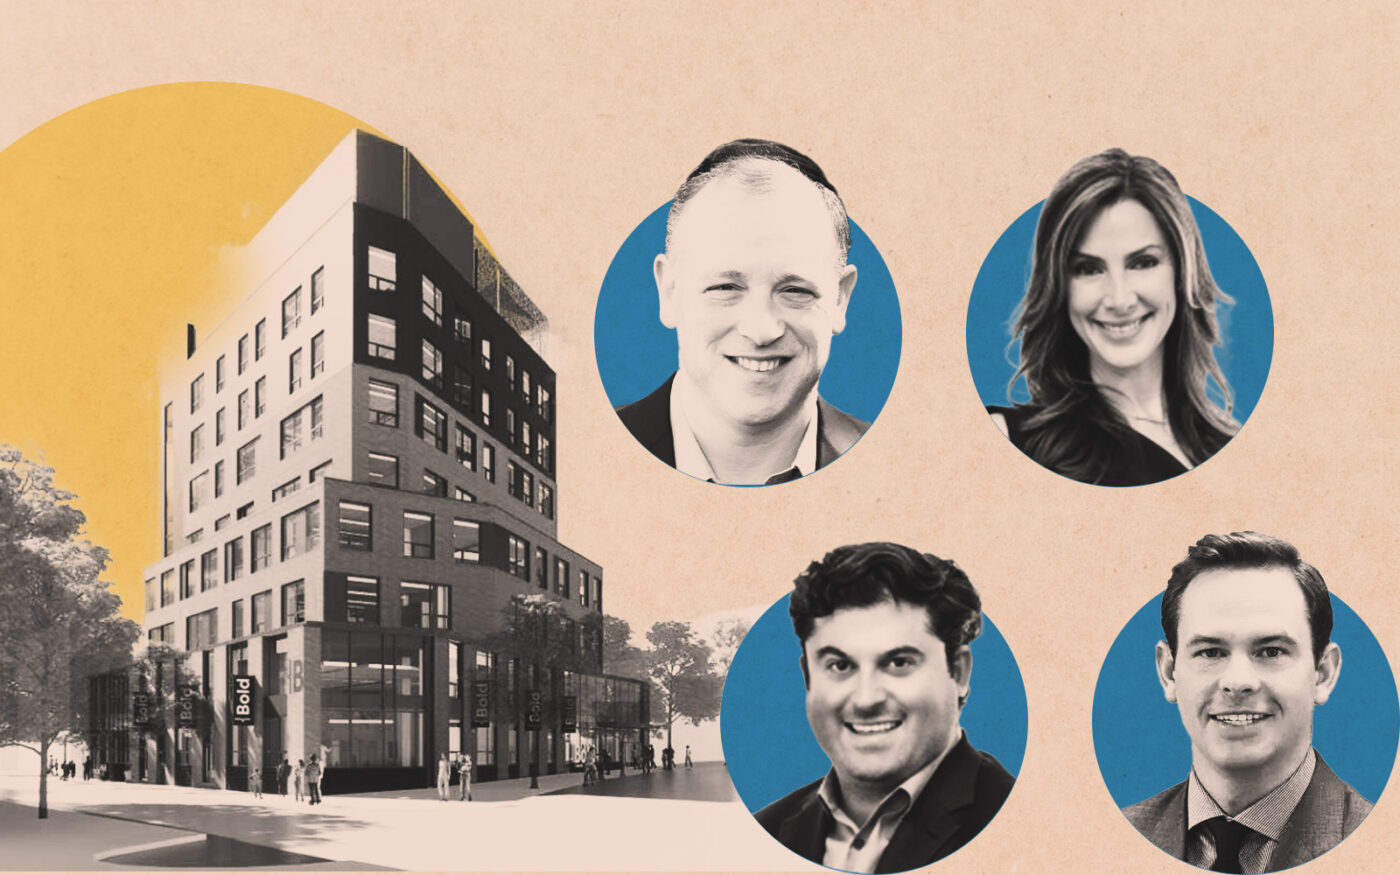 Locations Commercial Real Estate's Nick Zweig, OPEN Impact Real Estate's Lindsay Ornstein & Stephen Powers, Transwestern's Thomas Hines; rendering of Bold Charter School (Linkedin, Getty, OPEN Impact Real Estate, Transwestern)